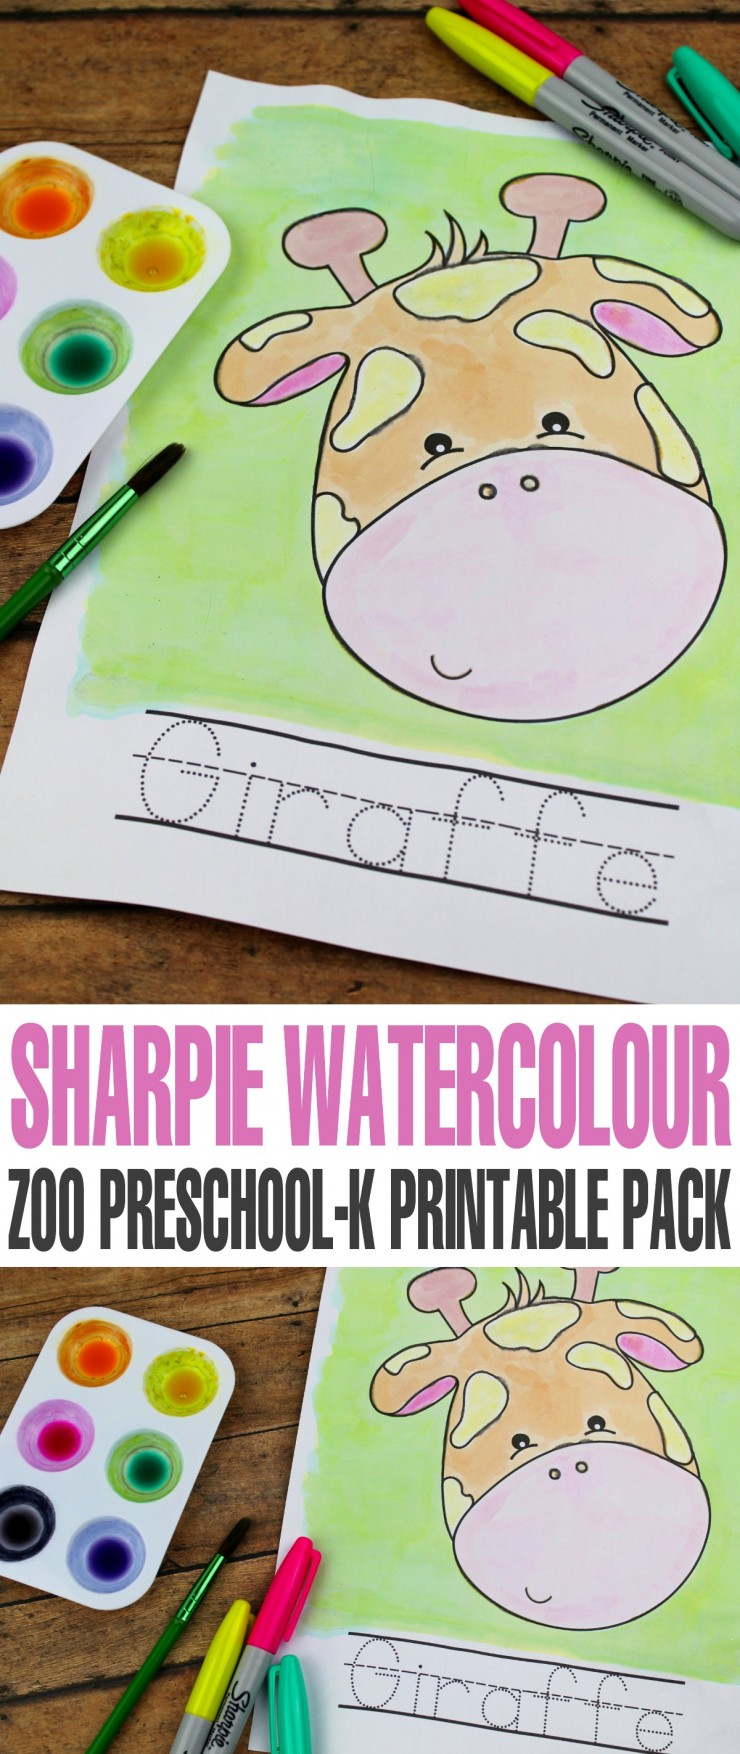 This Sharpie Watercolour Zoo Preschool-K Printable Pack features 16 pages of zoo animal themed fun for kids! Invite your children to paint the zoo animals! Let them trace the word with the paintbrush or a marker.